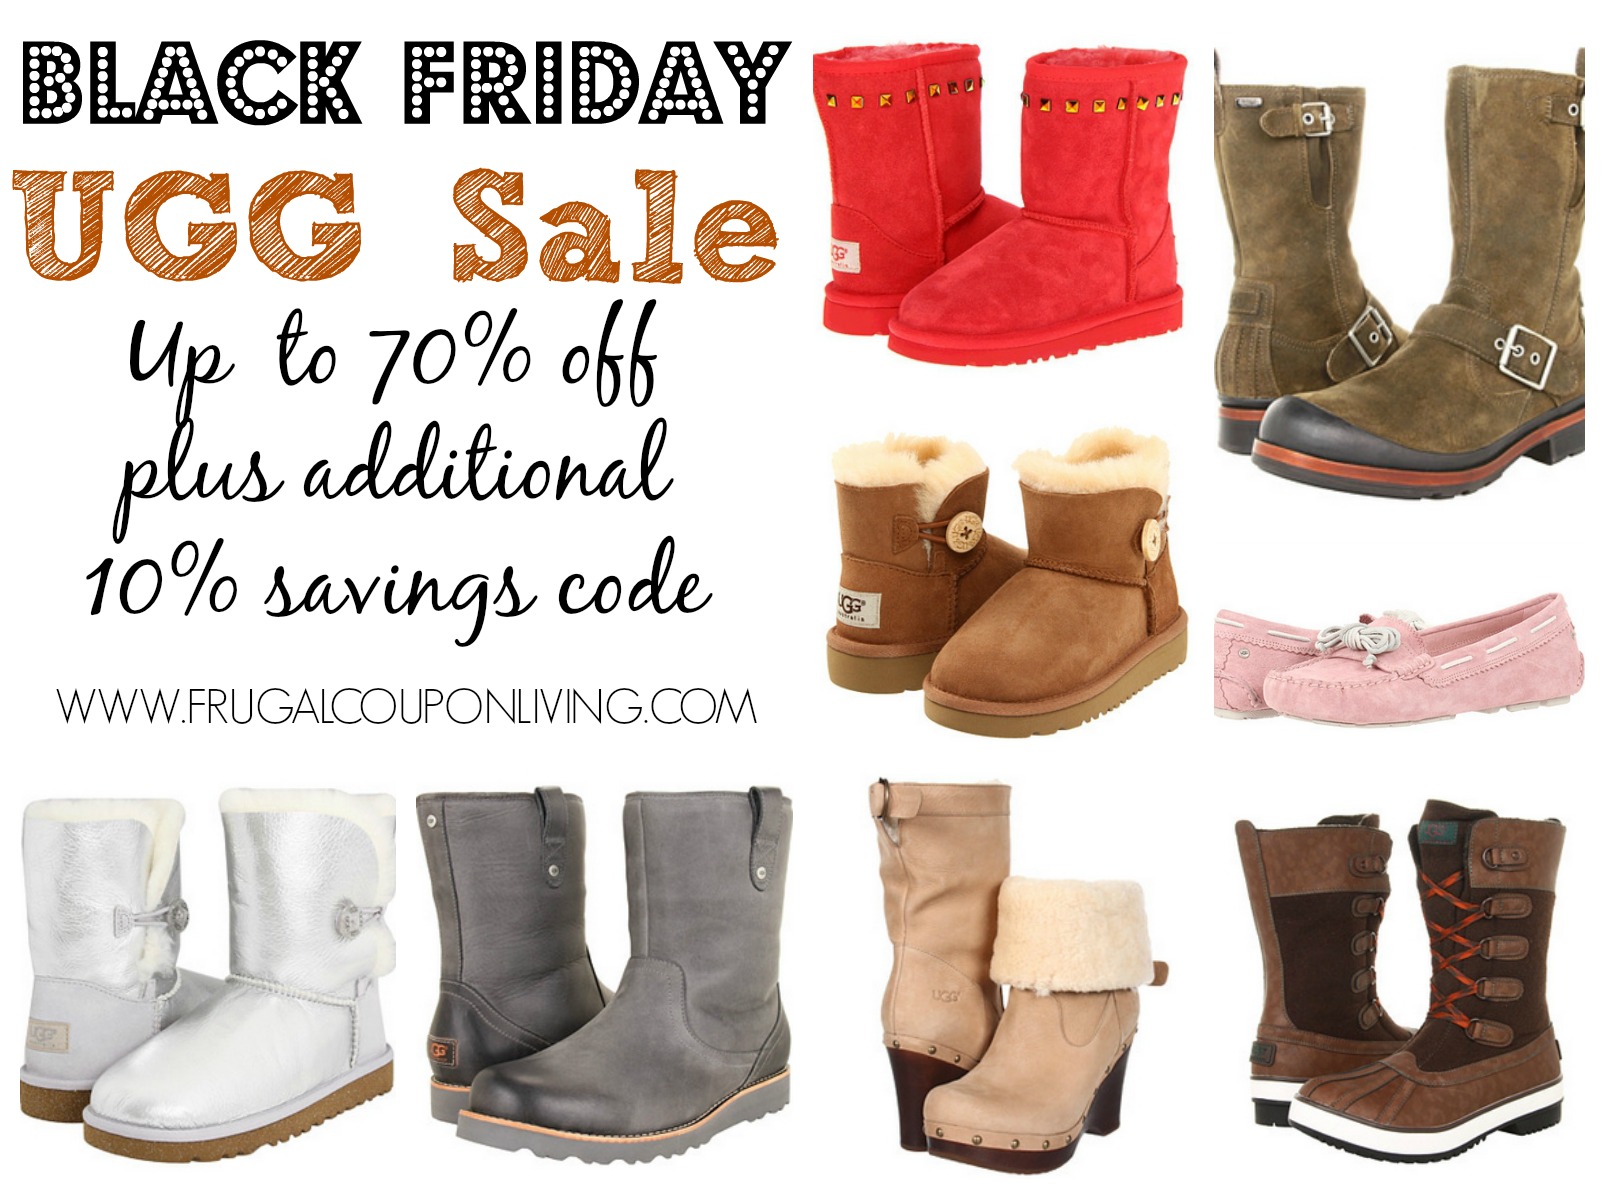 Cheap Uggs Boots Cyber Monday Outlet Uk 